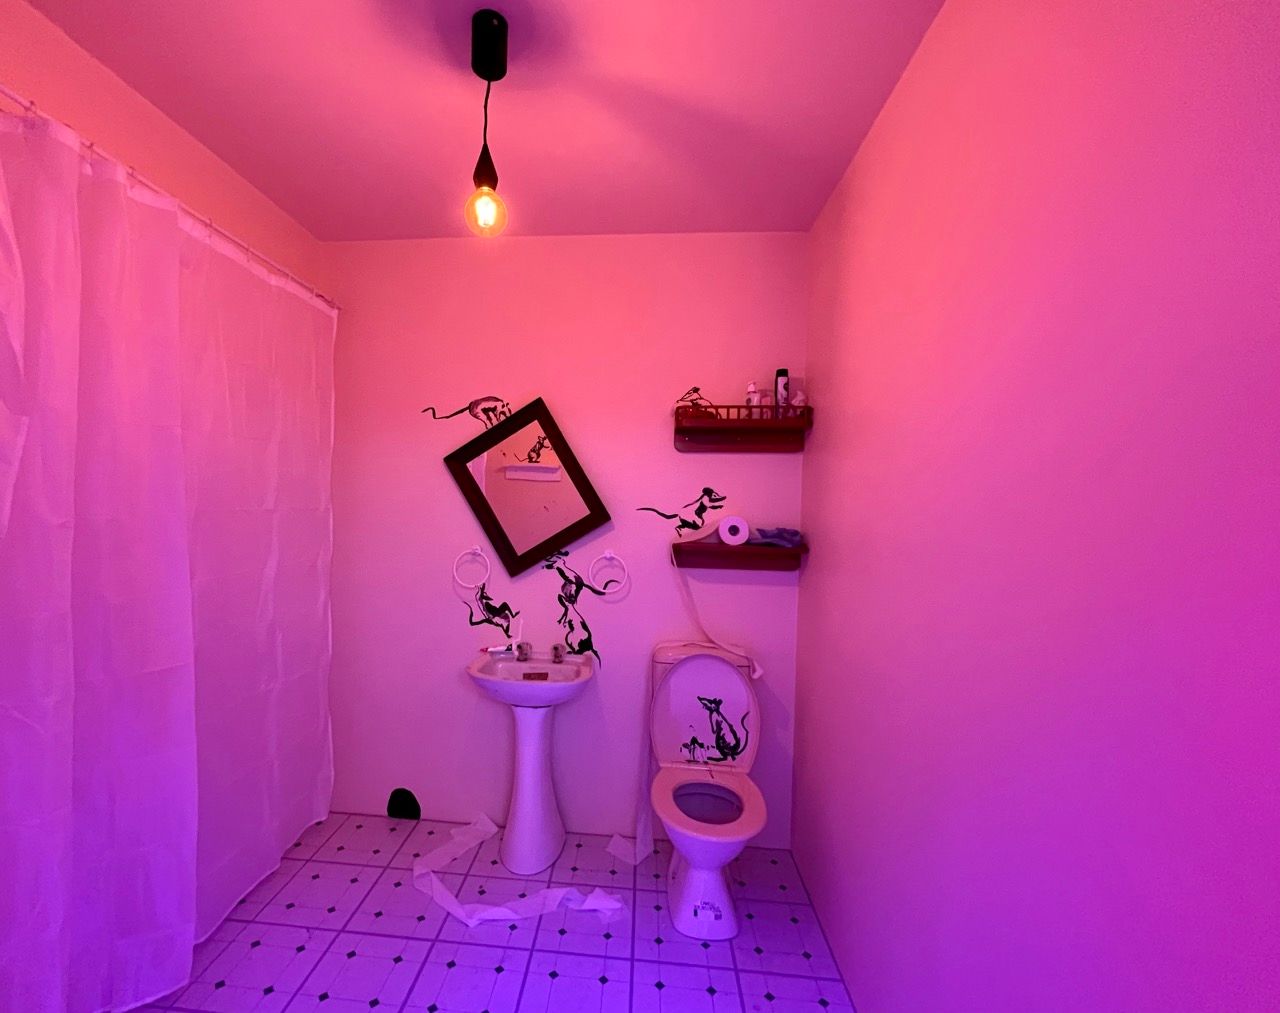 A bathroom with a pink hue to it, with mice crawling around the sink and the toilet